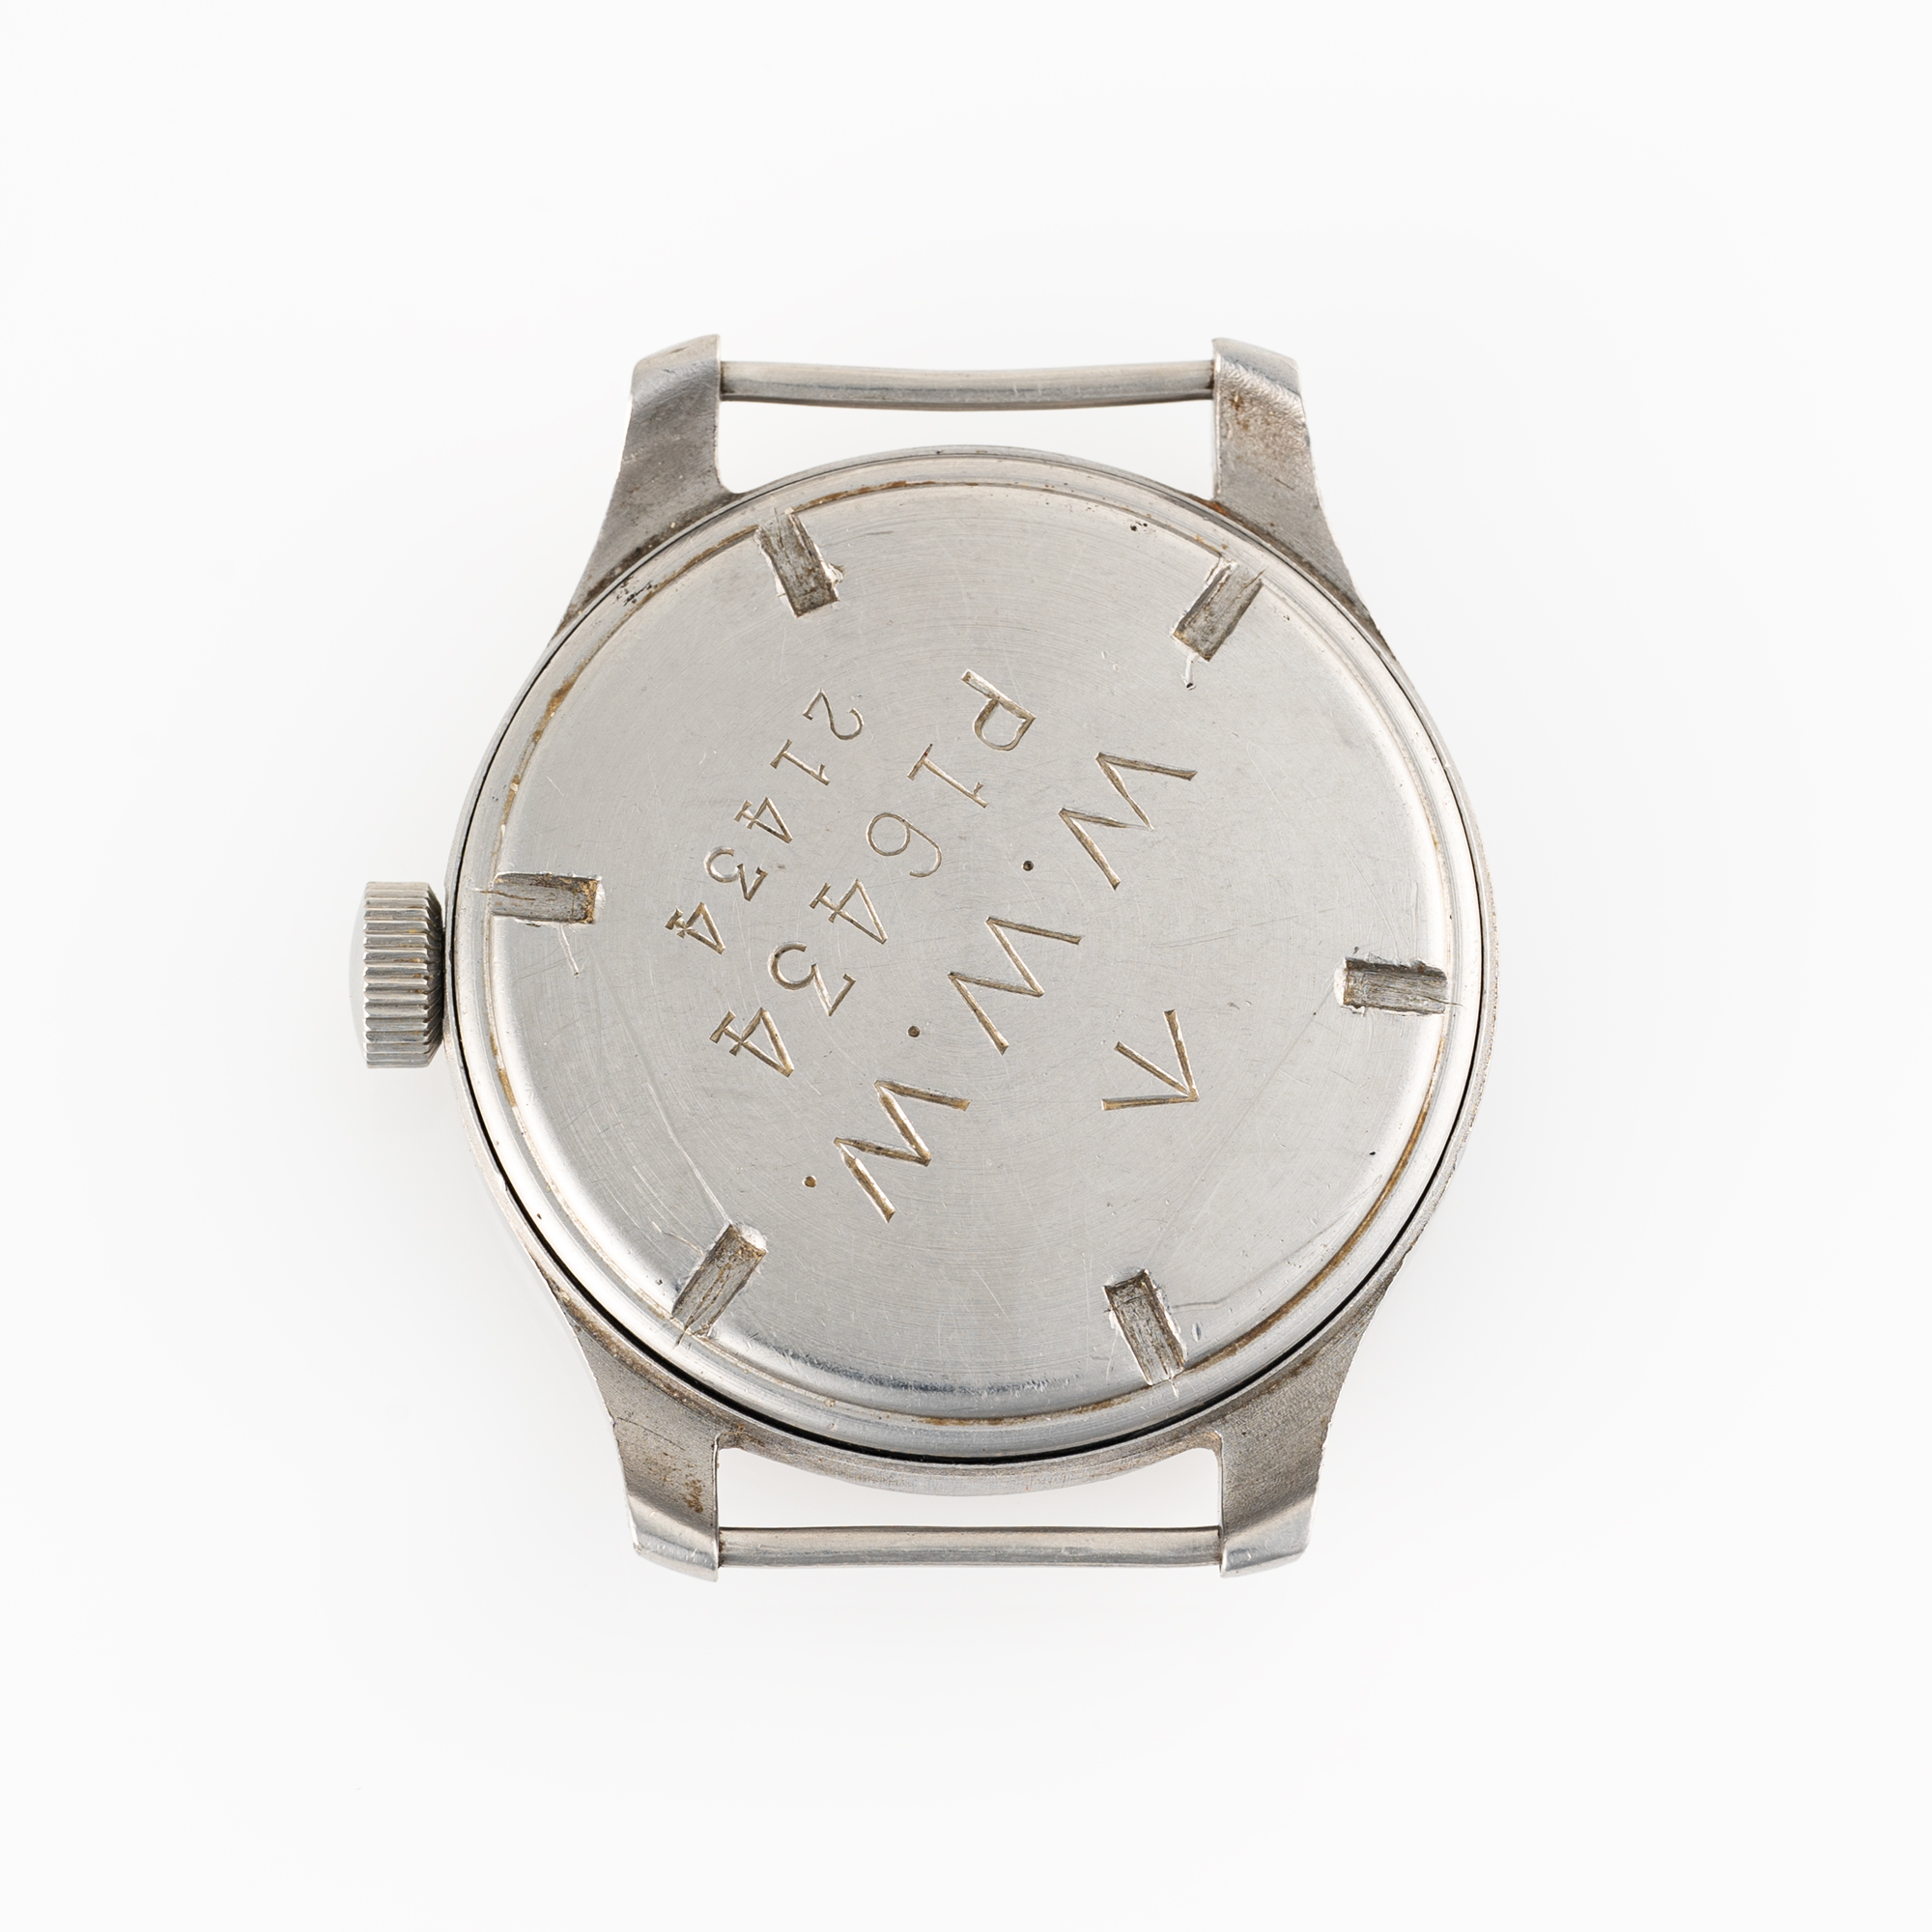 A GENTLEMAN'S STAINLESS STEEL BRITISH MILITARY CYMA W.W.W. WRIST WATCH CIRCA 1945, PART OF THE " - Image 8 of 8